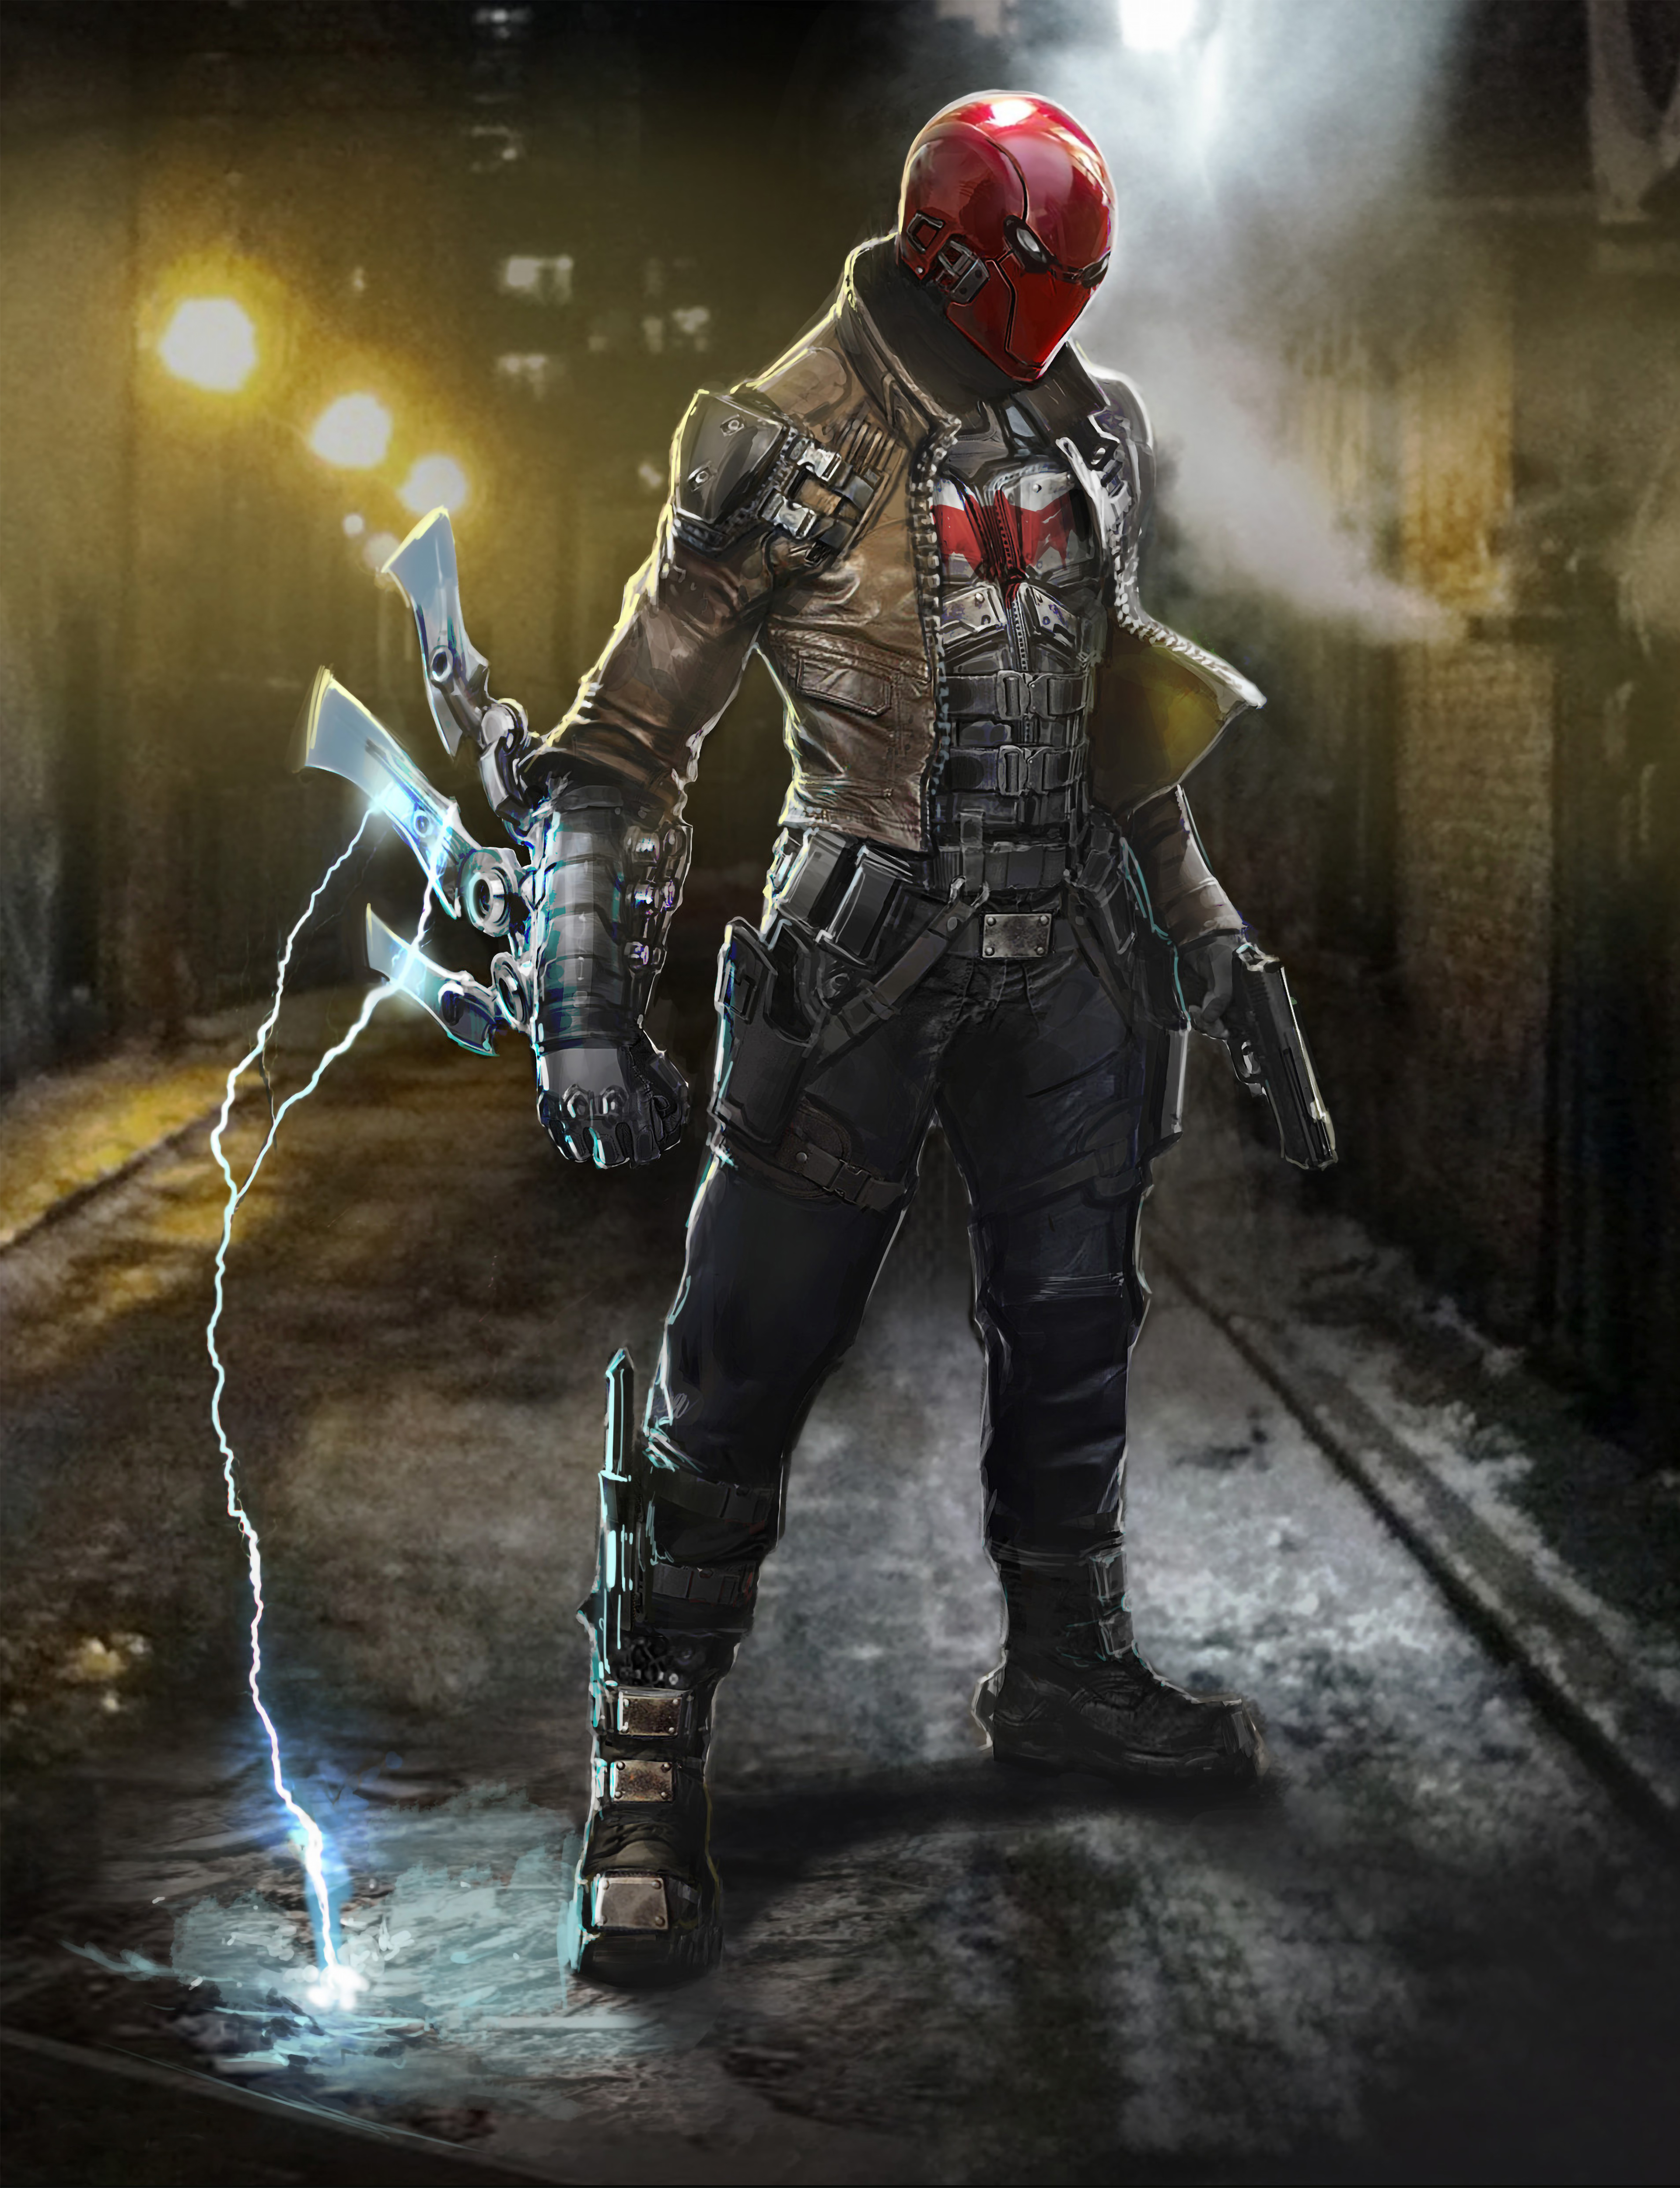 360x325 New Red Hood Art 4k 360x325 Resolution Wallpaper Hd Superheroes 4k Wallpapers Images Photos And Background Wallpapers Den